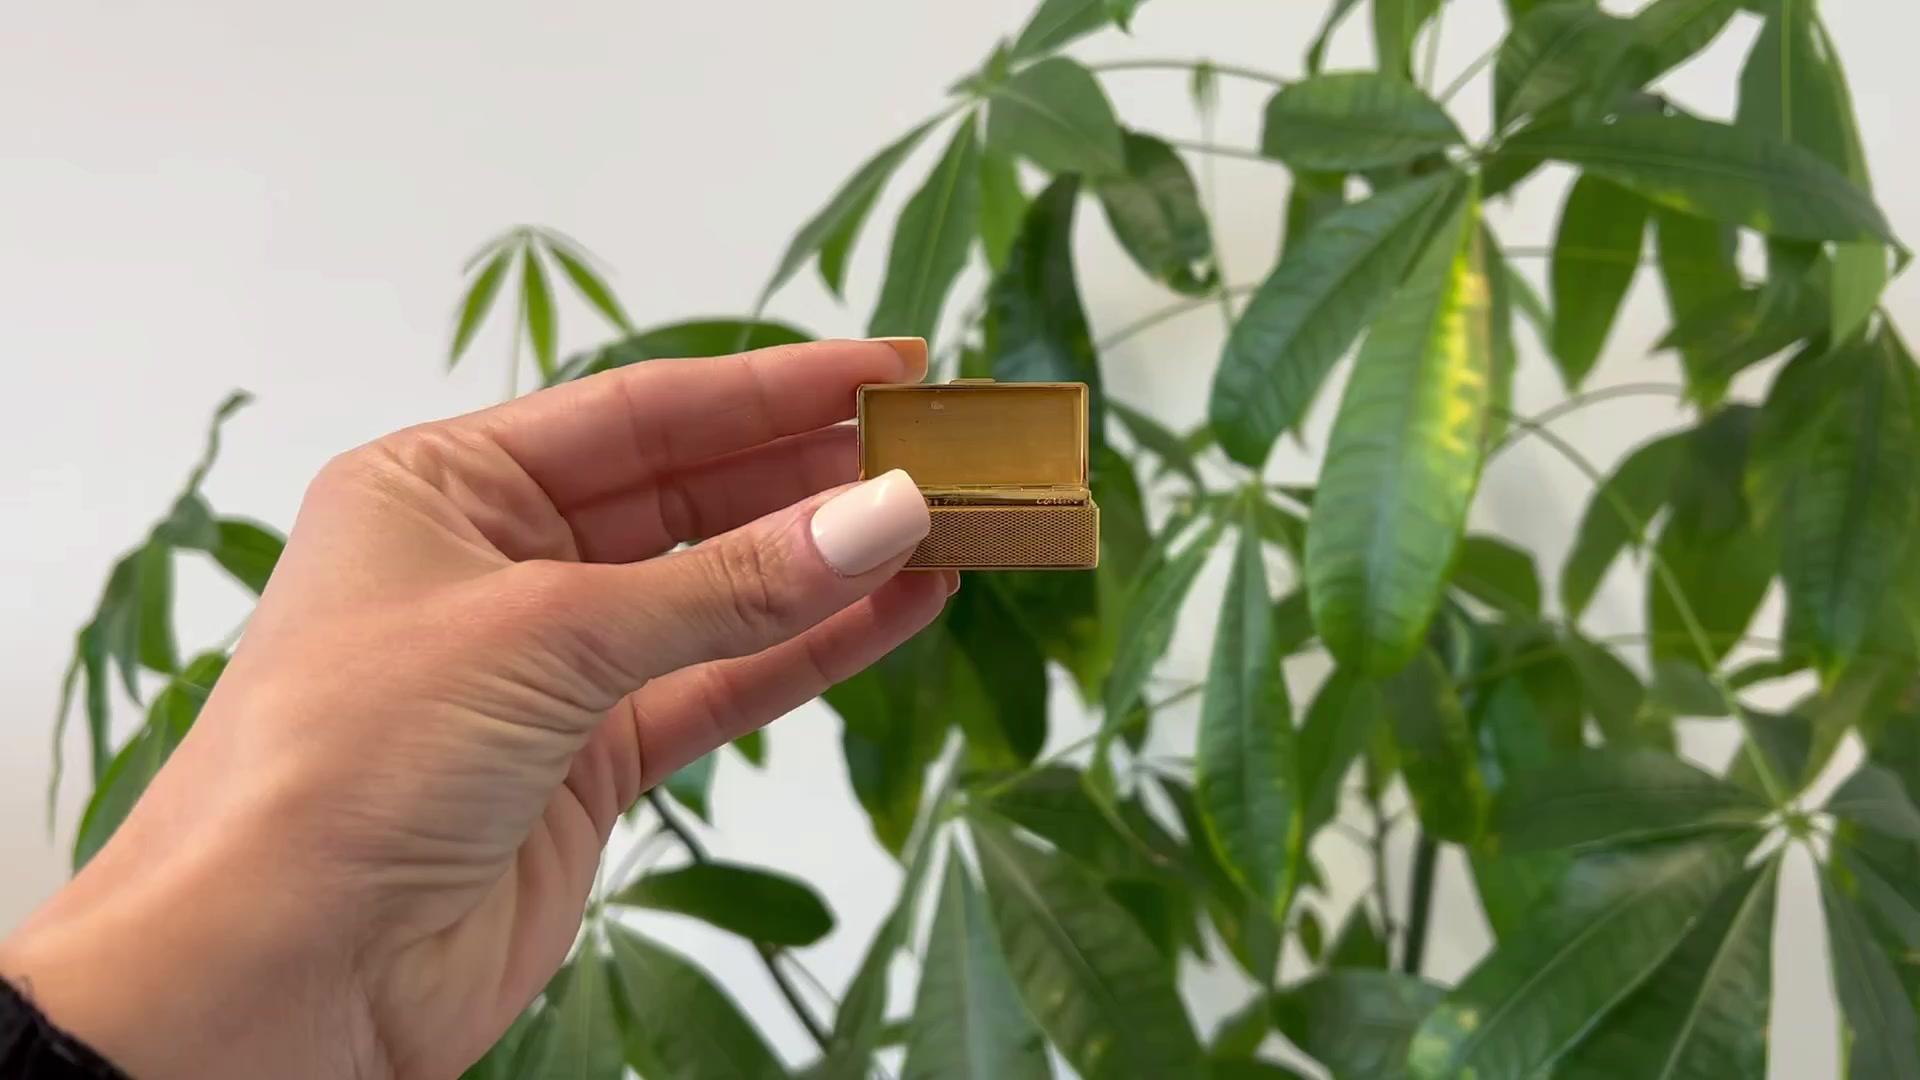 One Mid Century Cartier Italy 18k Yellow Gold Pill Box. Crafted in 18 karat yellow gold signed Cartier Italy serial #15273 with purity marks, weighing 32.00 grams. Circa 1950. The box is 1 ½ inch in length by ¾ inch in width. 

About this Item: